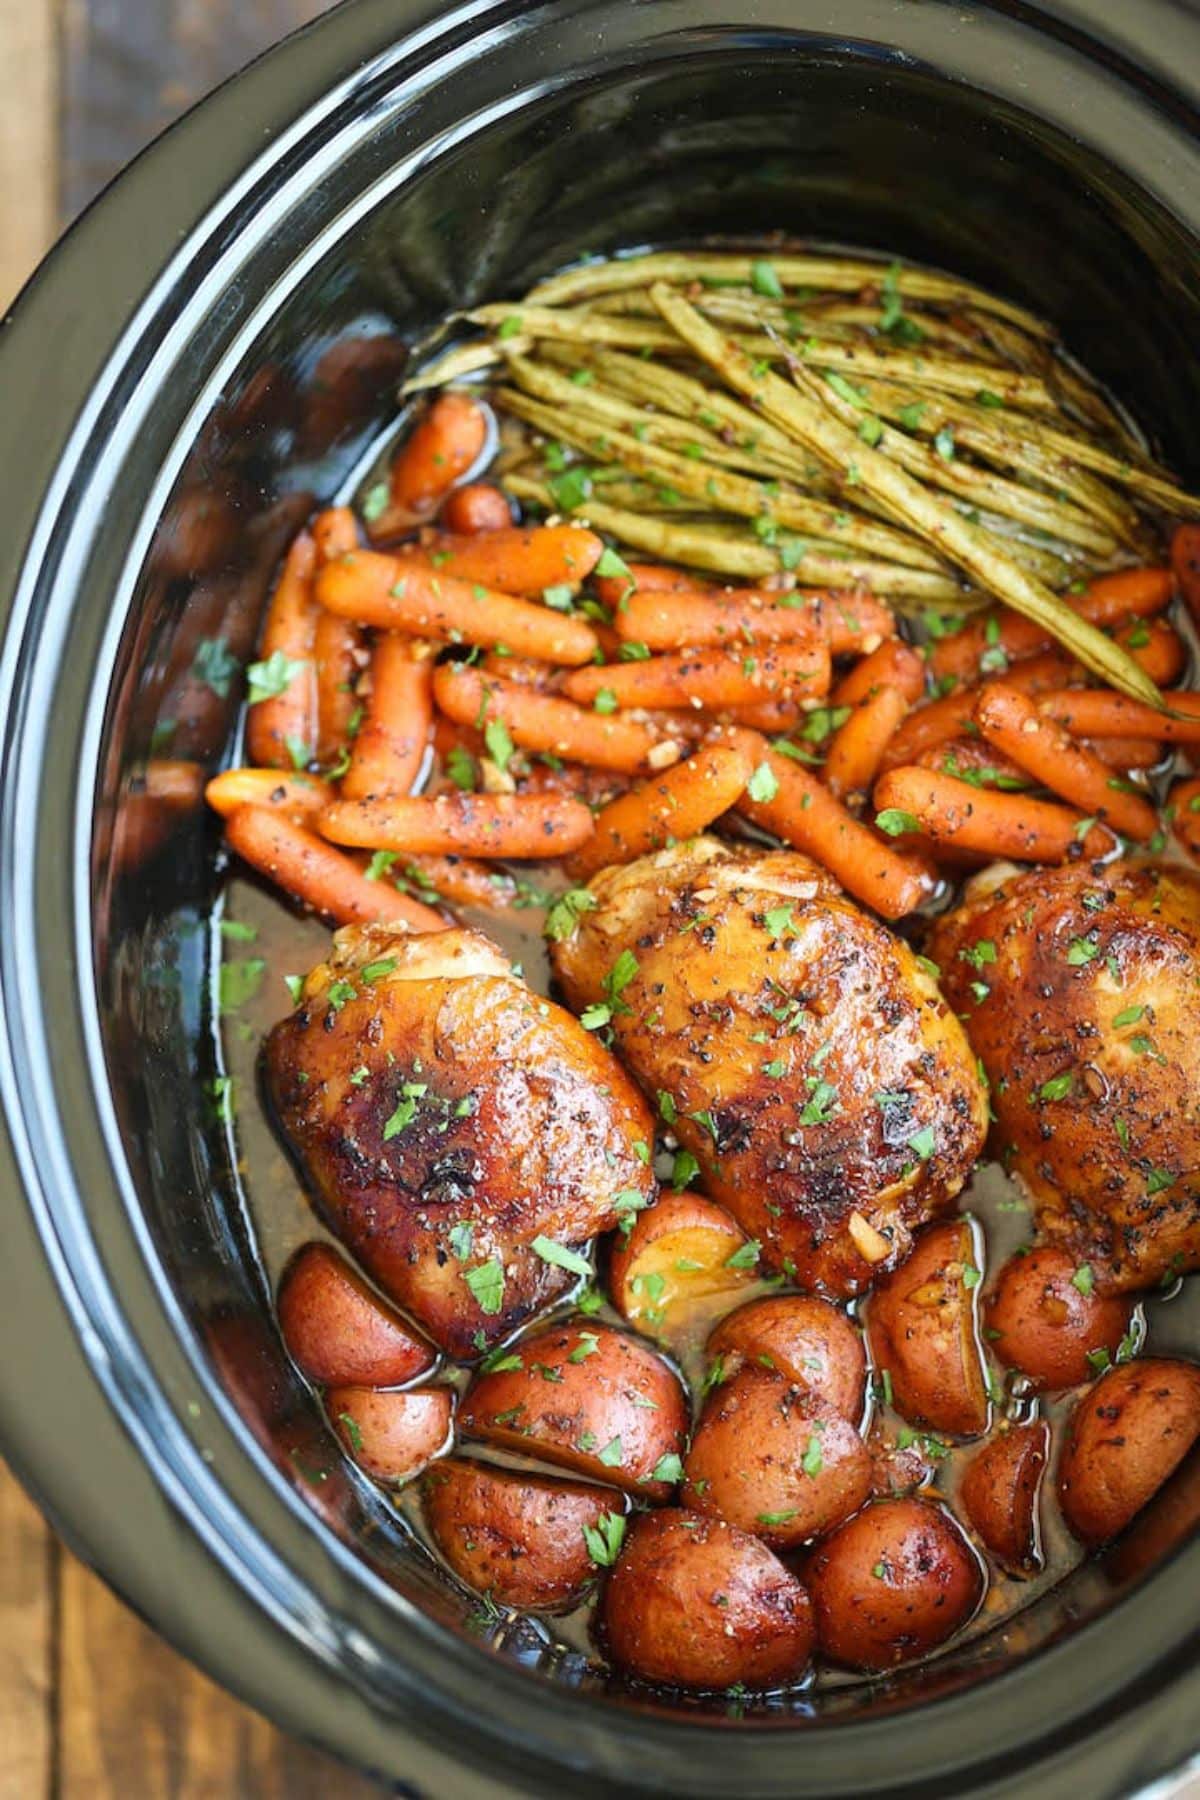 Deliicous and healthy slow cooker honey garlic chicken and veggies.